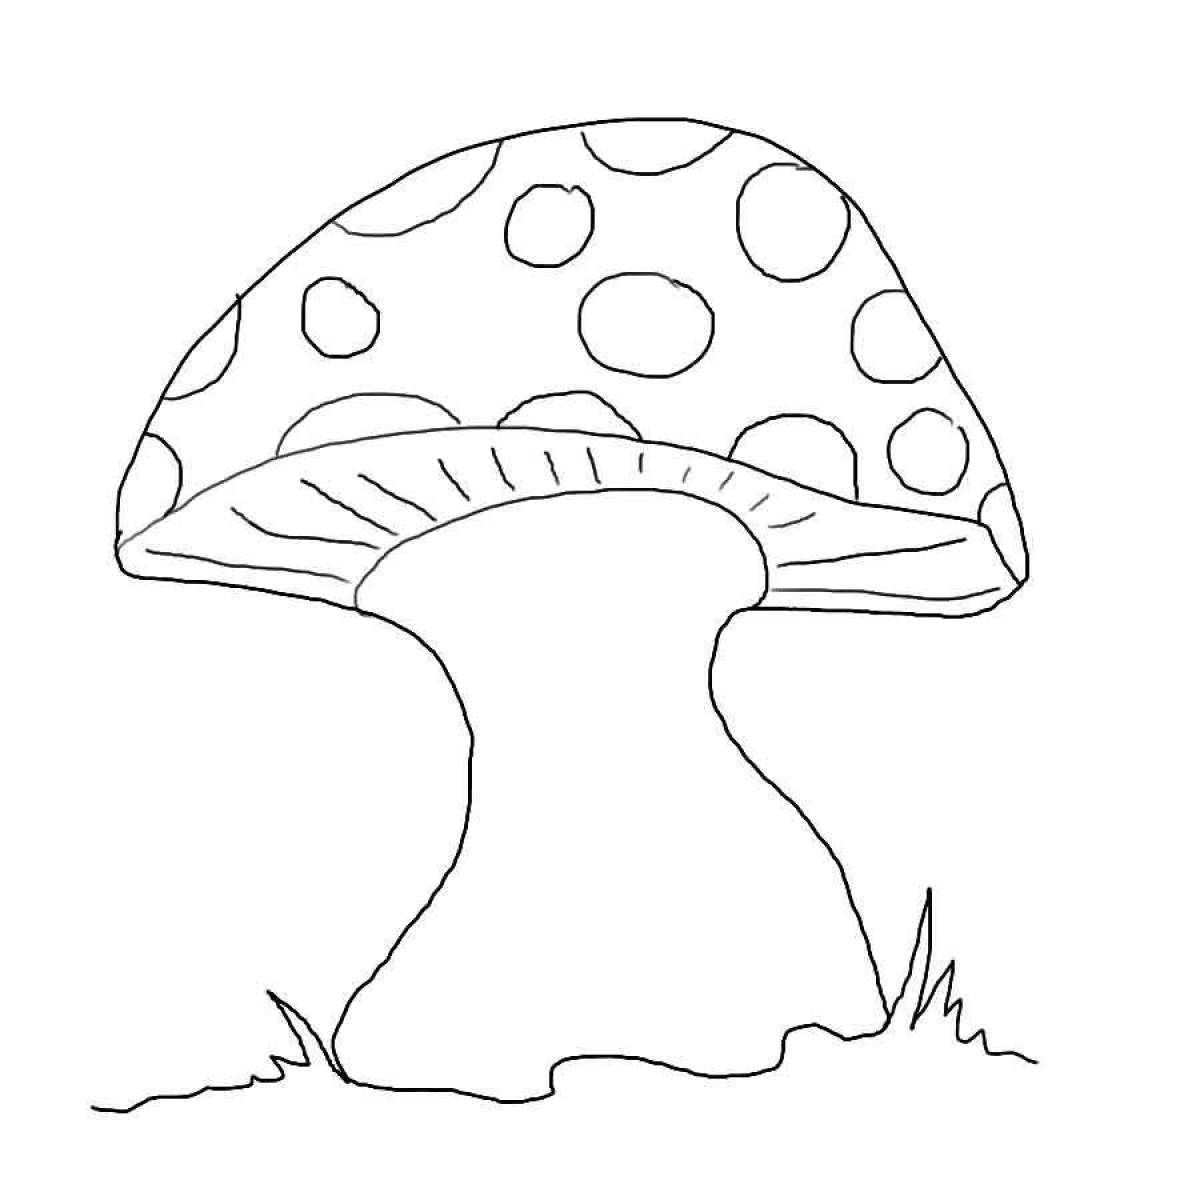 Wonderful mushroom coloring pages for kids